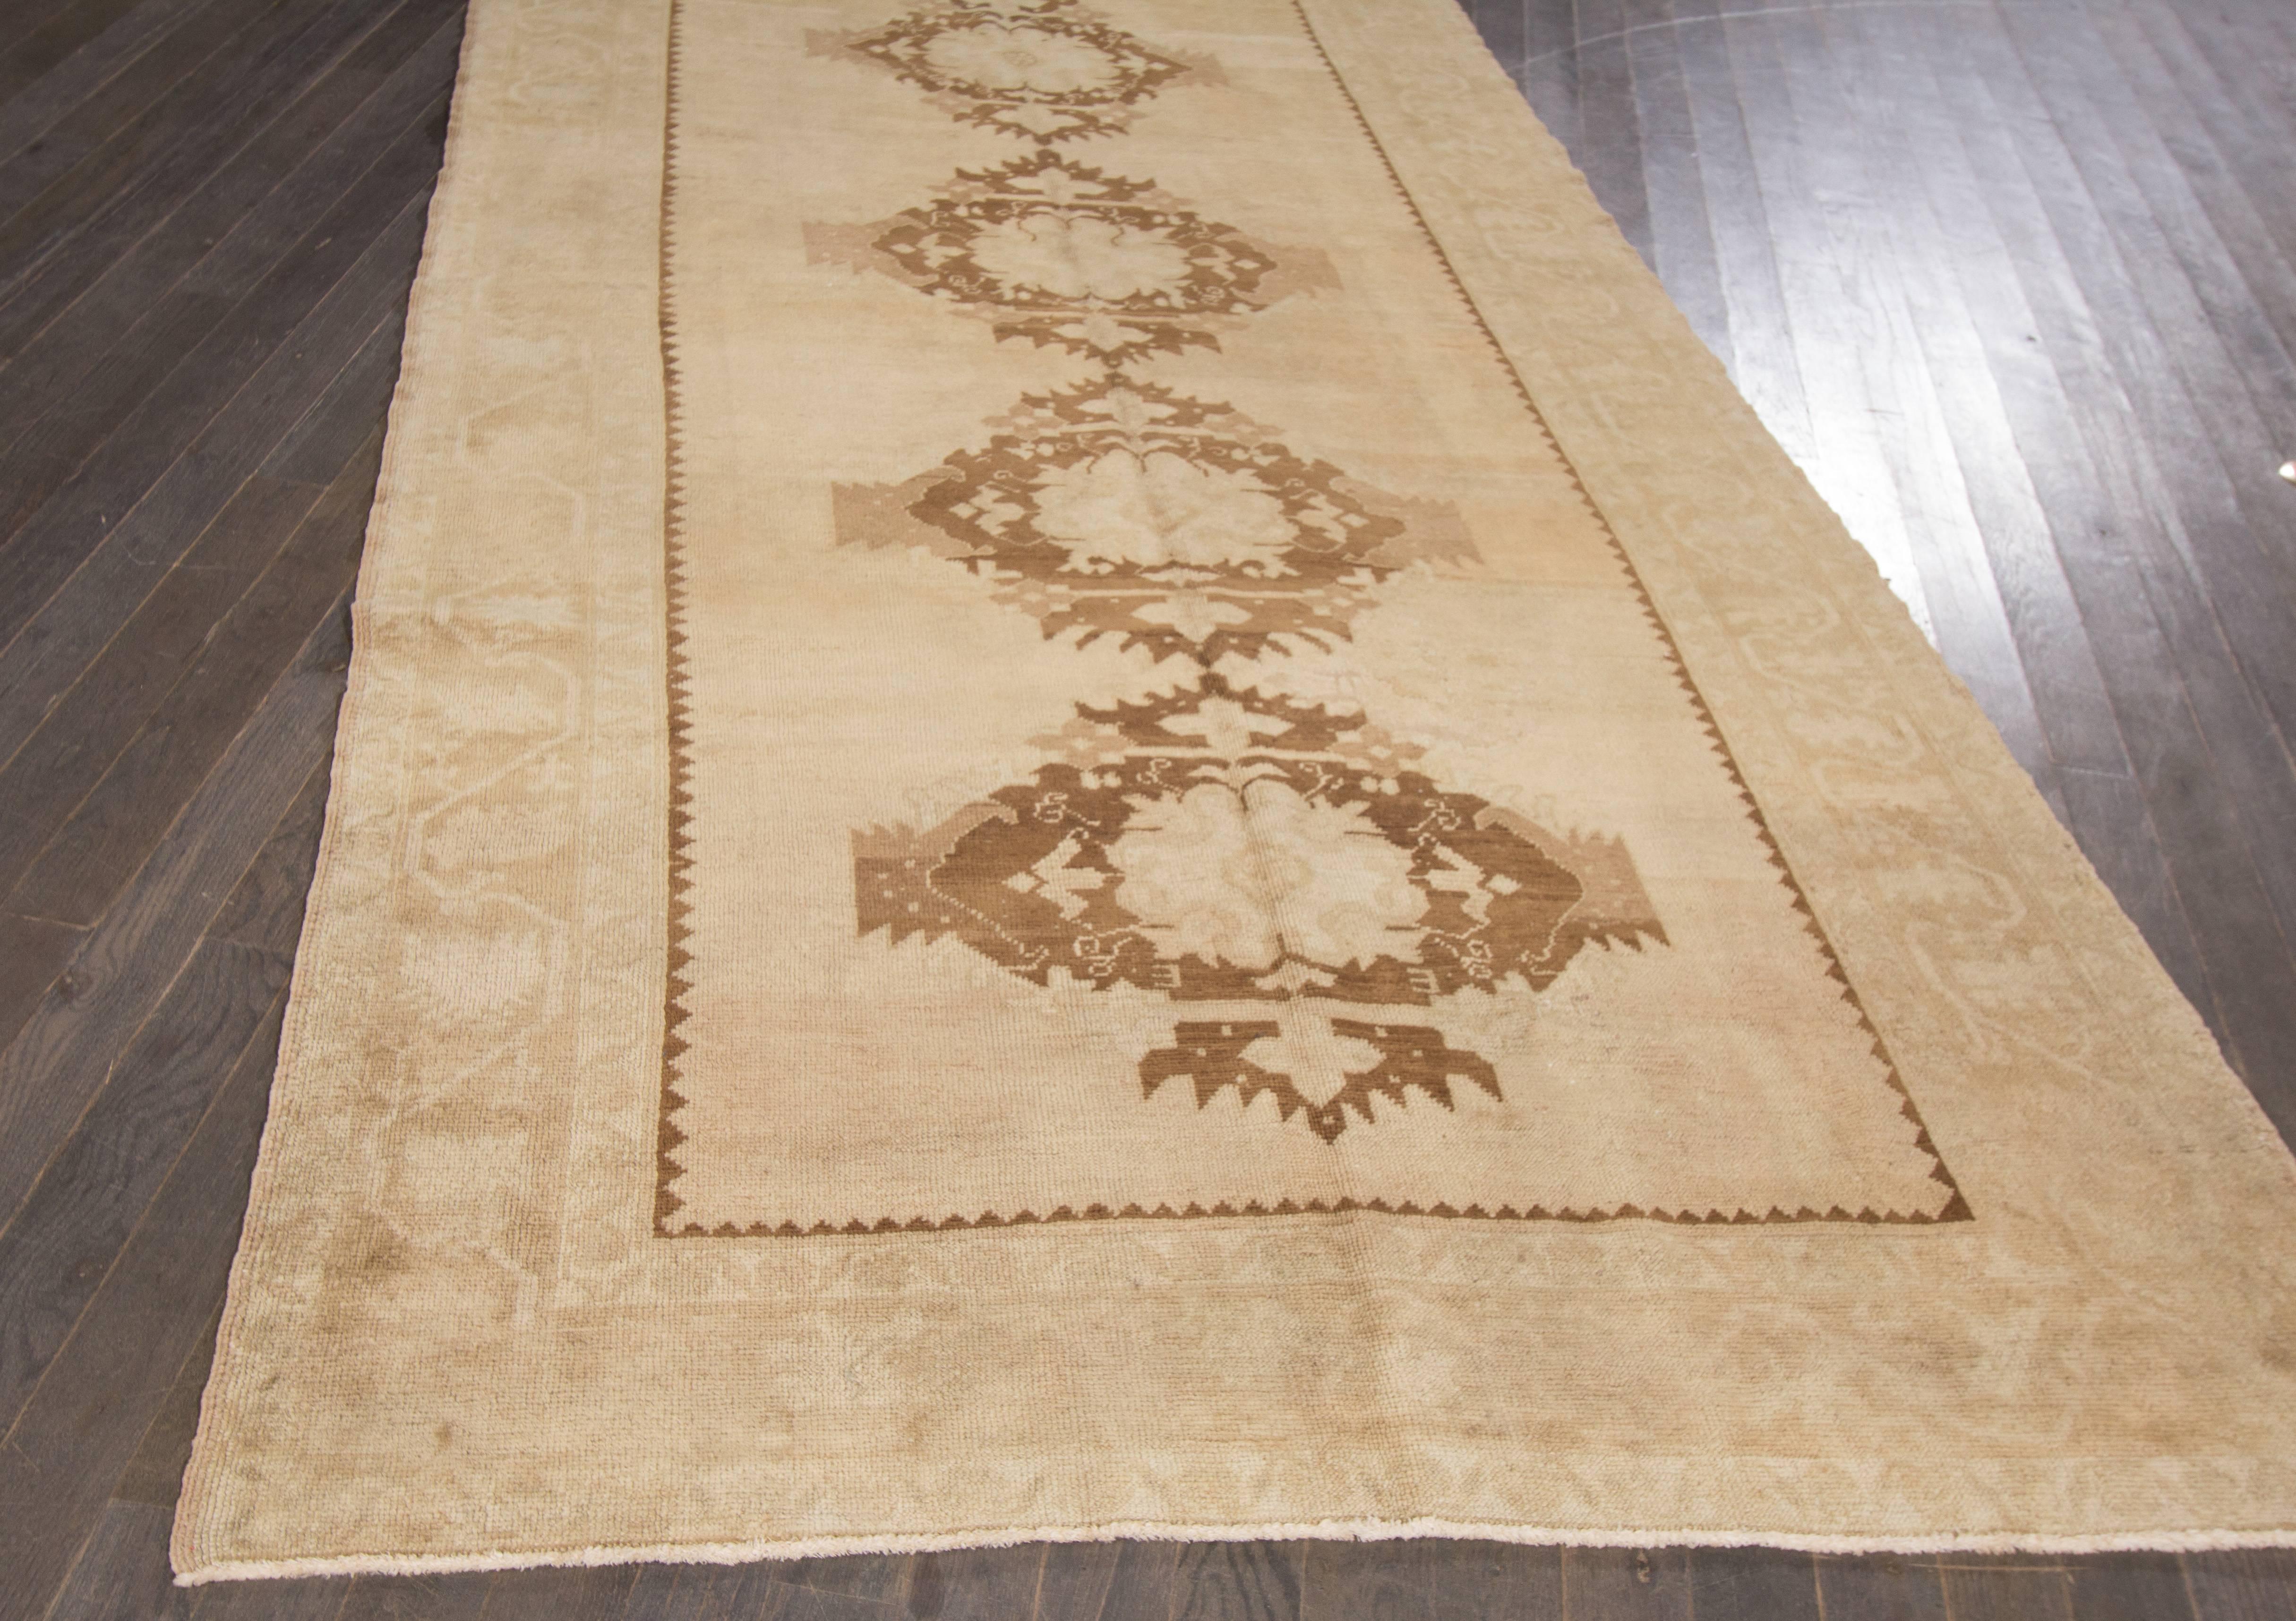 This beautiful antique Khotan hand-knotted design rug will make your floor look splendid. This collection is made in wool. It's measures are: 5'.2 x 10'.6
This antique Khotan rug was made in Turkestan.